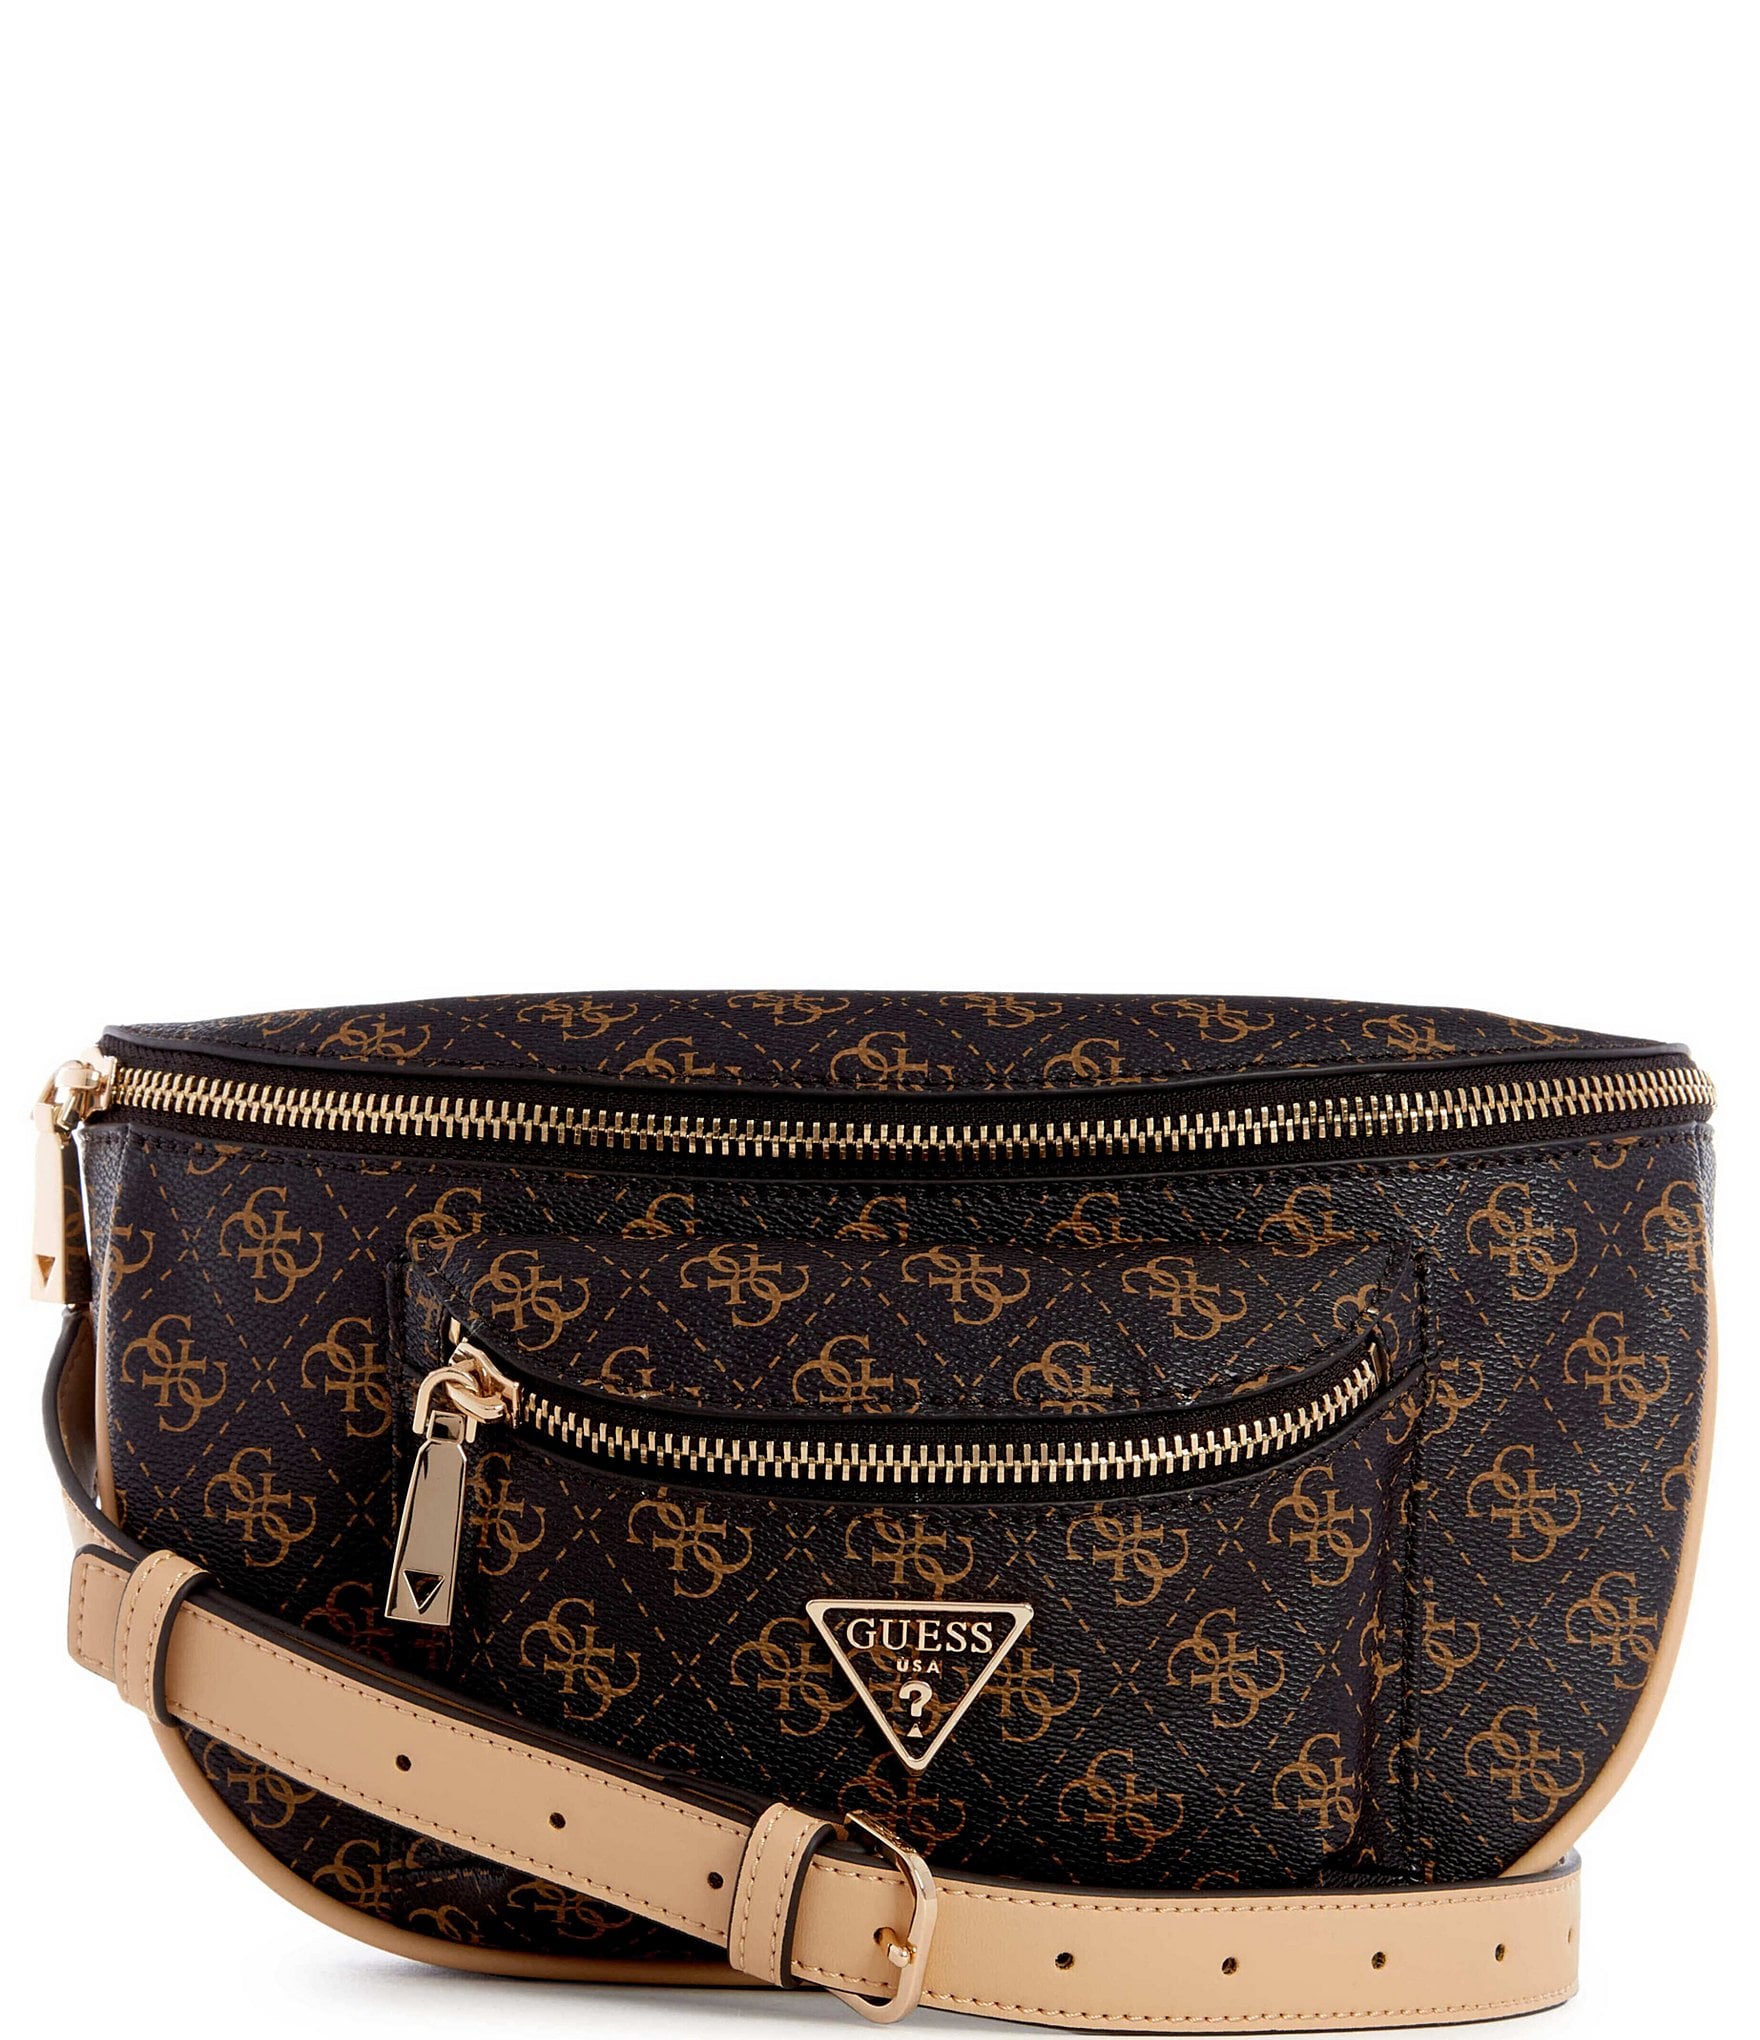 Louis Vuitton, Bags, Dillards Bag Real Louis Vuitton Brand New With Tags